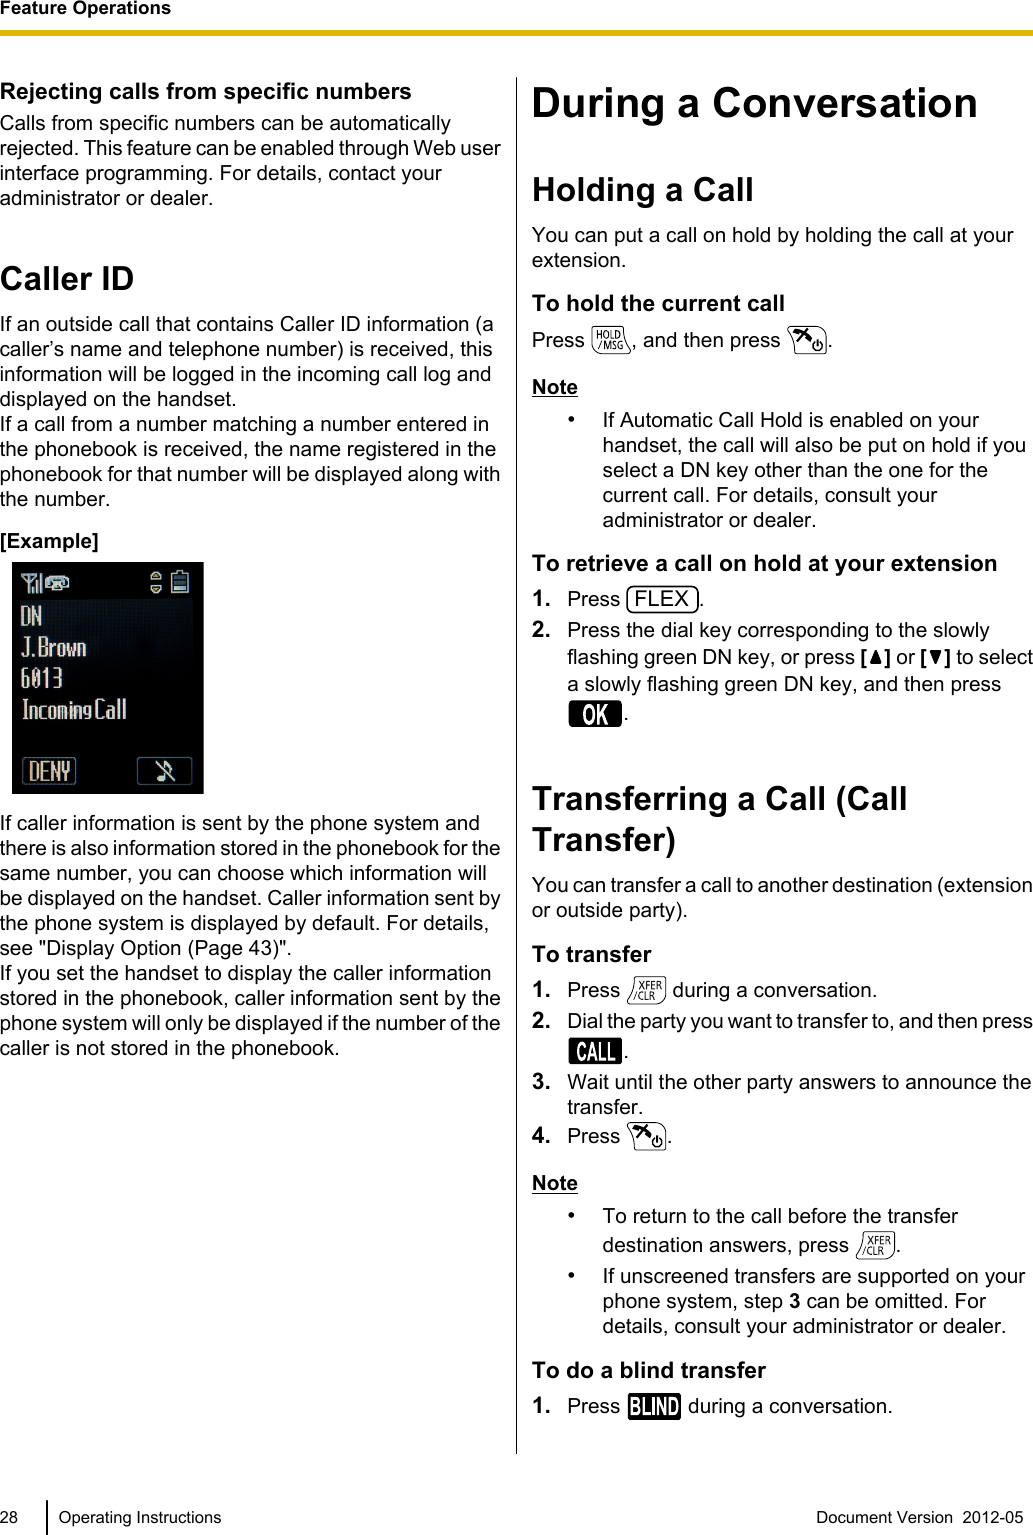 Rejecting calls from specific numbersCalls from specific numbers can be automaticallyrejected. This feature can be enabled through Web userinterface programming. For details, contact youradministrator or dealer.Caller IDIf an outside call that contains Caller ID information (acaller’s name and telephone number) is received, thisinformation will be logged in the incoming call log anddisplayed on the handset.If a call from a number matching a number entered inthe phonebook is received, the name registered in thephonebook for that number will be displayed along withthe number.[Example]If caller information is sent by the phone system andthere is also information stored in the phonebook for thesame number, you can choose which information willbe displayed on the handset. Caller information sent bythe phone system is displayed by default. For details,see &quot;Display Option (Page 43)&quot;.If you set the handset to display the caller informationstored in the phonebook, caller information sent by thephone system will only be displayed if the number of thecaller is not stored in the phonebook.During a ConversationHolding a CallYou can put a call on hold by holding the call at yourextension.To hold the current callPress  , and then press  .Note•If Automatic Call Hold is enabled on yourhandset, the call will also be put on hold if youselect a DN key other than the one for thecurrent call. For details, consult youradministrator or dealer.To retrieve a call on hold at your extension1. Press FLEX.2. Press the dial key corresponding to the slowlyflashing green DN key, or press [ ] or [ ] to selecta slowly flashing green DN key, and then press.Transferring a Call (CallTransfer)You can transfer a call to another destination (extensionor outside party).To transfer1. Press   during a conversation.2. Dial the party you want to transfer to, and then press.3. Wait until the other party answers to announce thetransfer.4. Press  .Note•To return to the call before the transferdestination answers, press  .•If unscreened transfers are supported on yourphone system, step 3 can be omitted. Fordetails, consult your administrator or dealer.To do a blind transfer1. Press   during a conversation.28 Operating Instructions Document Version  2012-05  Feature Operations